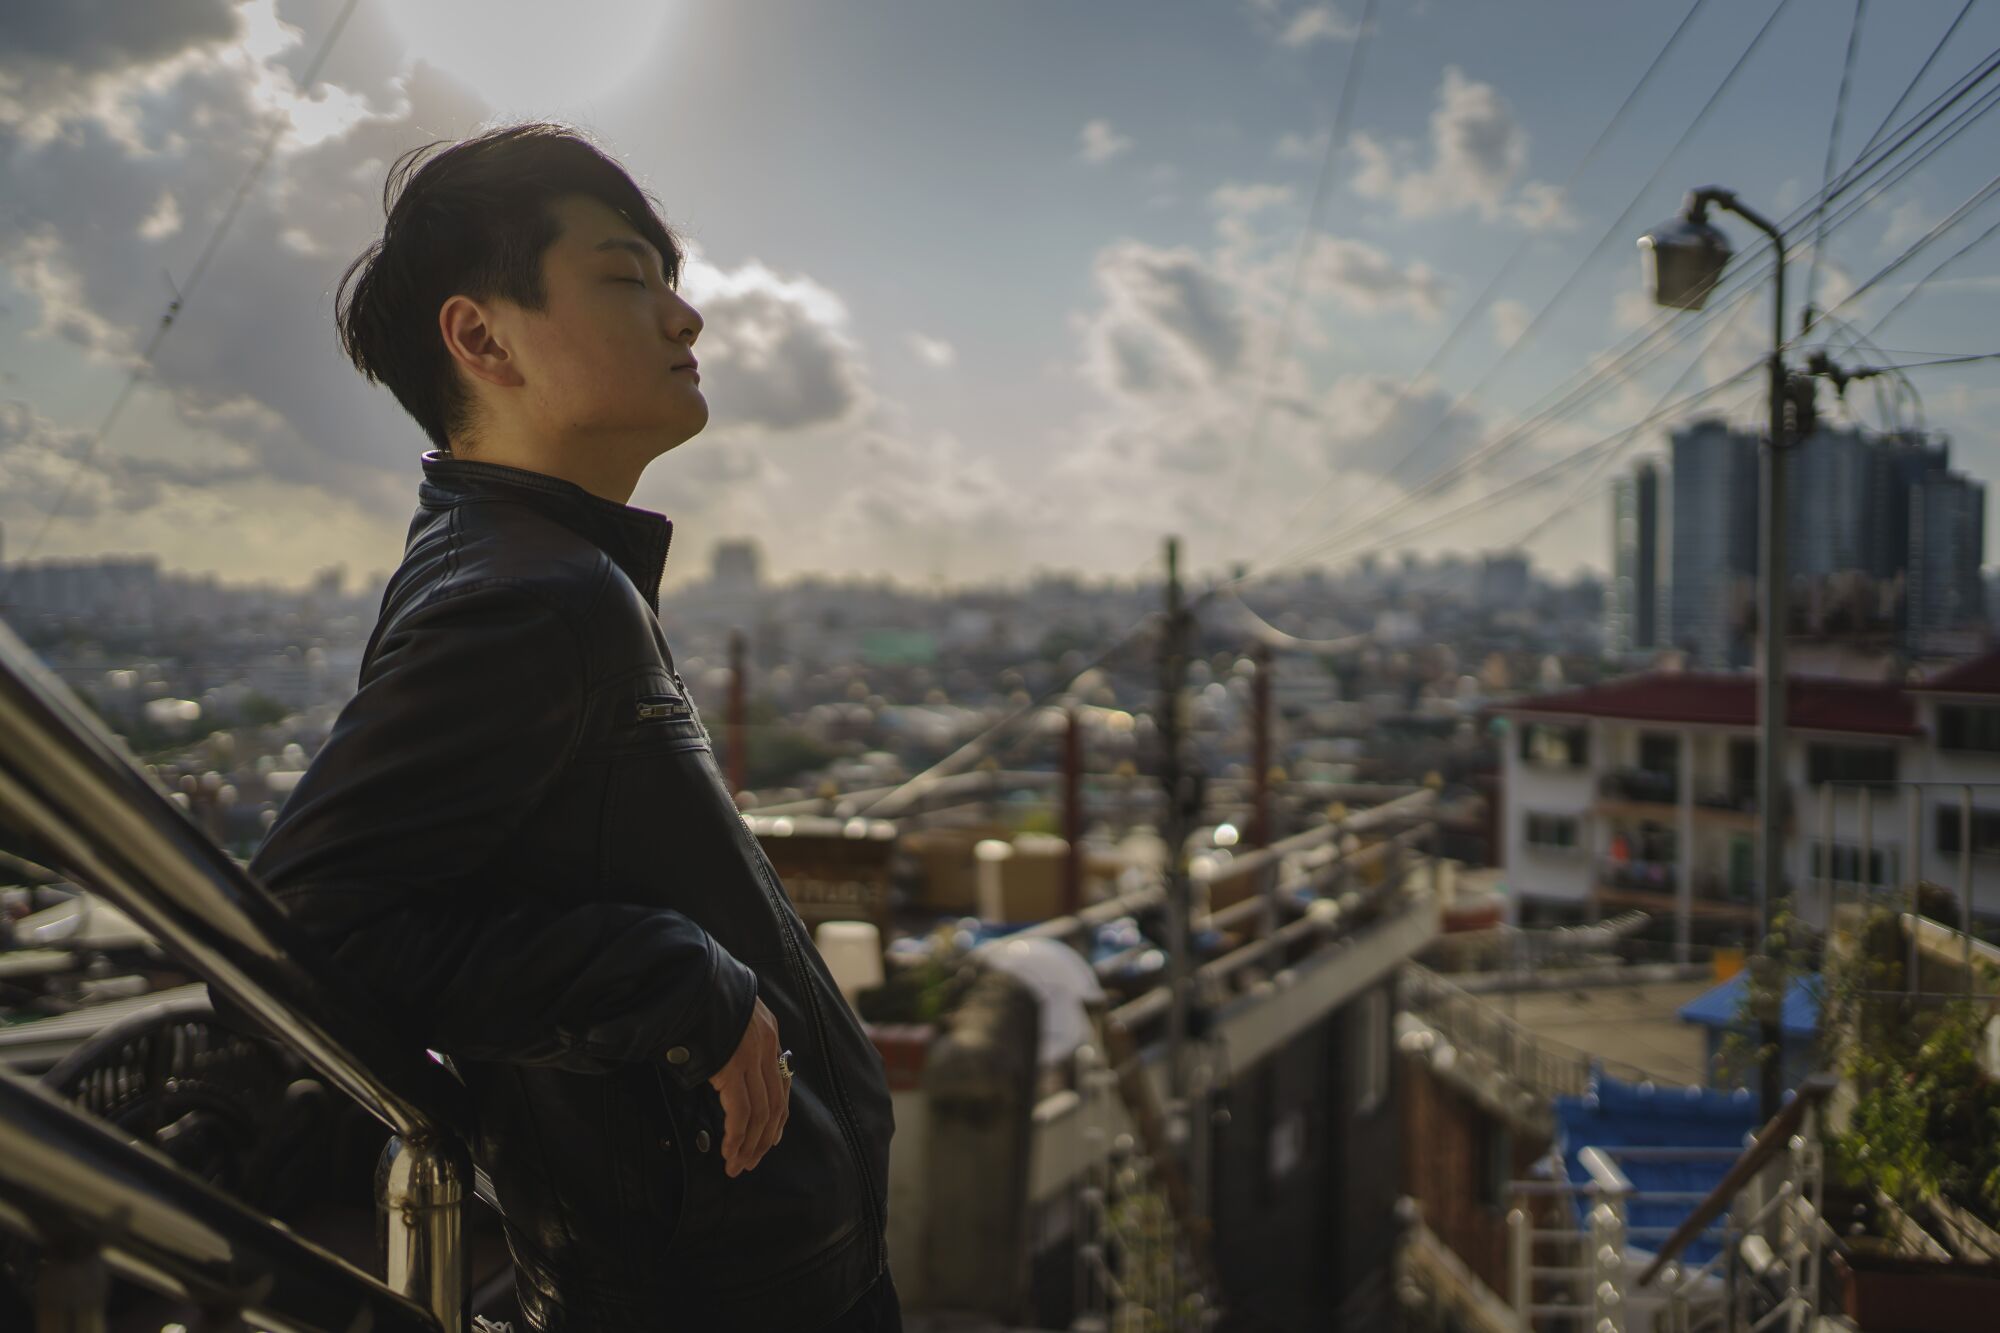 Magician Ed Kwon, 24, poses for a portrait in Seoul, South Korea, on a staircase with the city laid out in the background. 